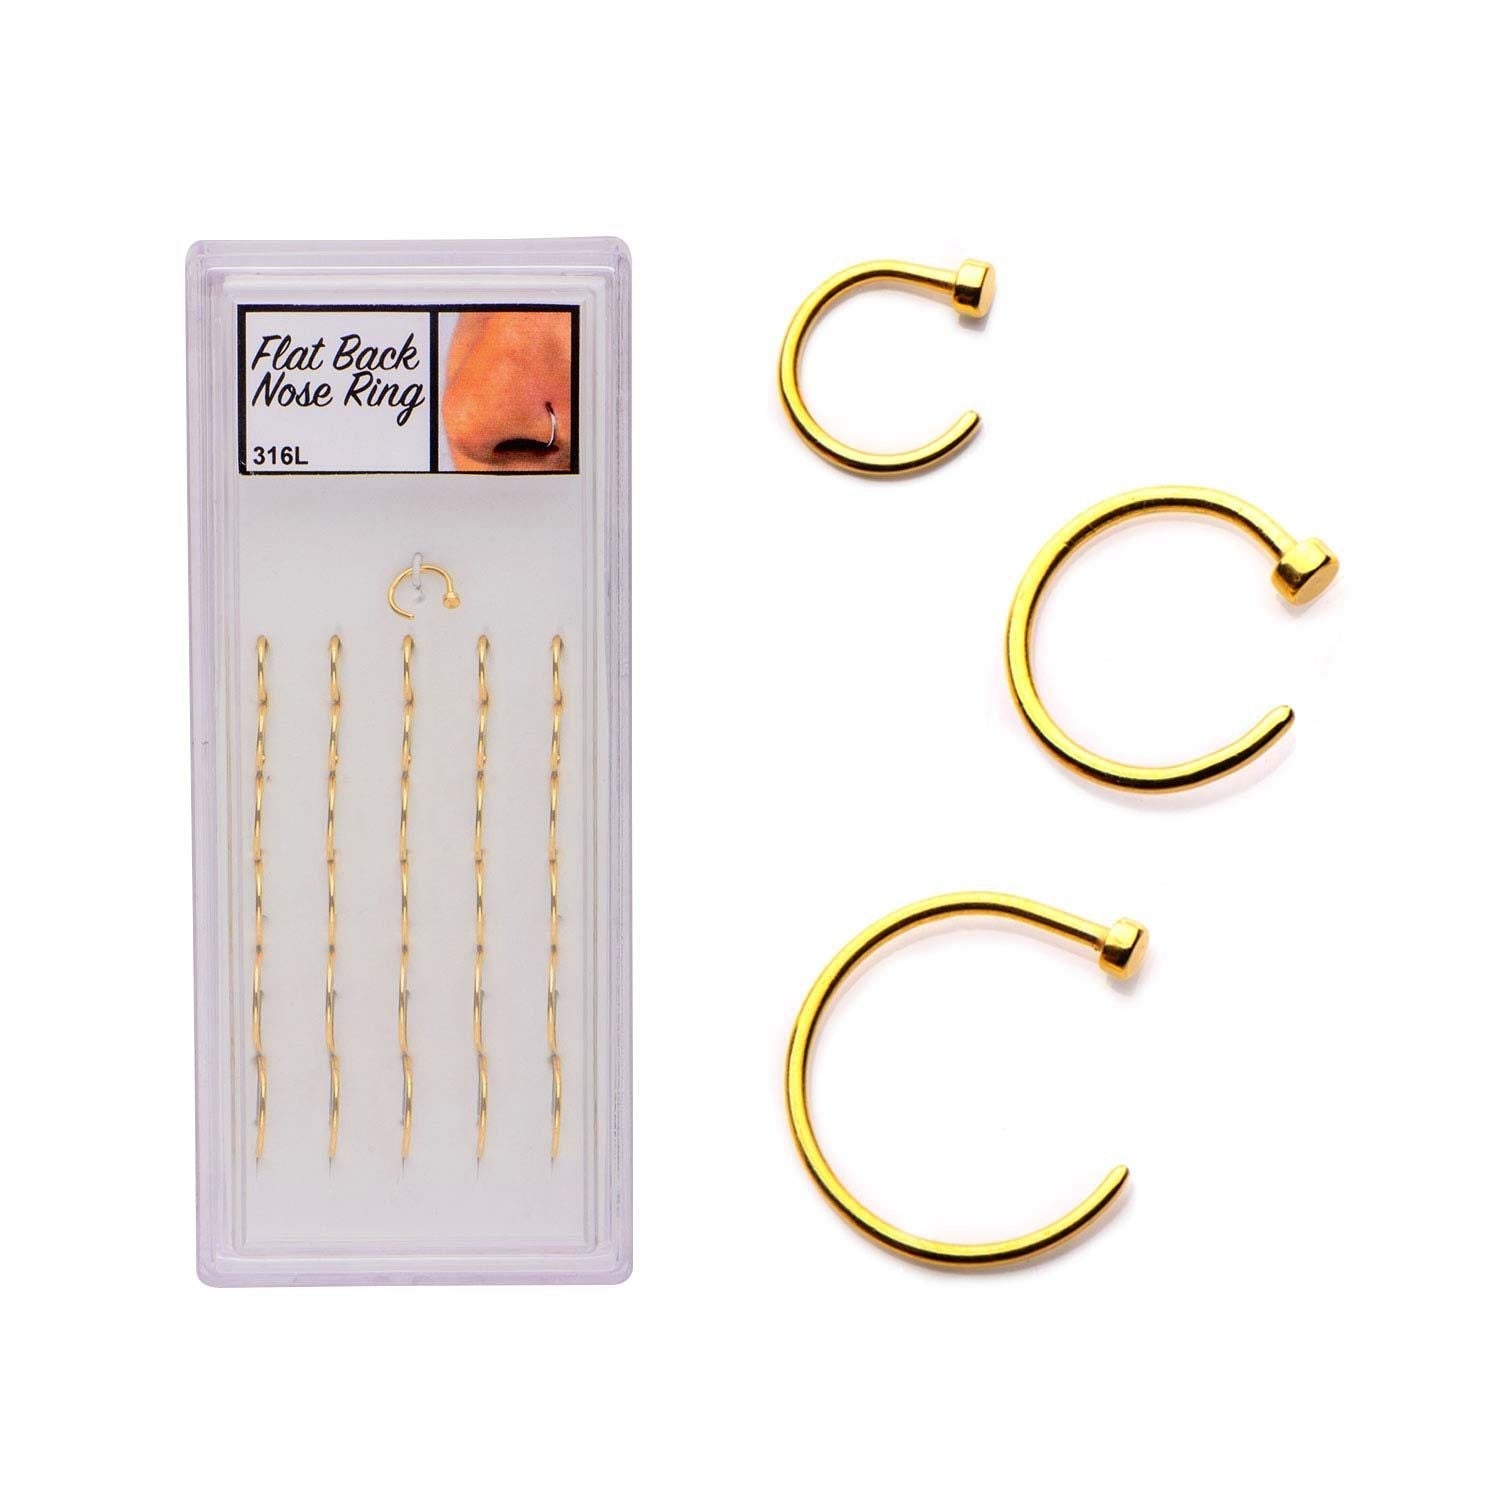 Nose Ring - C-Shaped Nose Ring 31pcs to a pack 20g Gold Plate Flat Back Nose Ring Assortment - 1 Pack -Rebel Bod-RebelBod